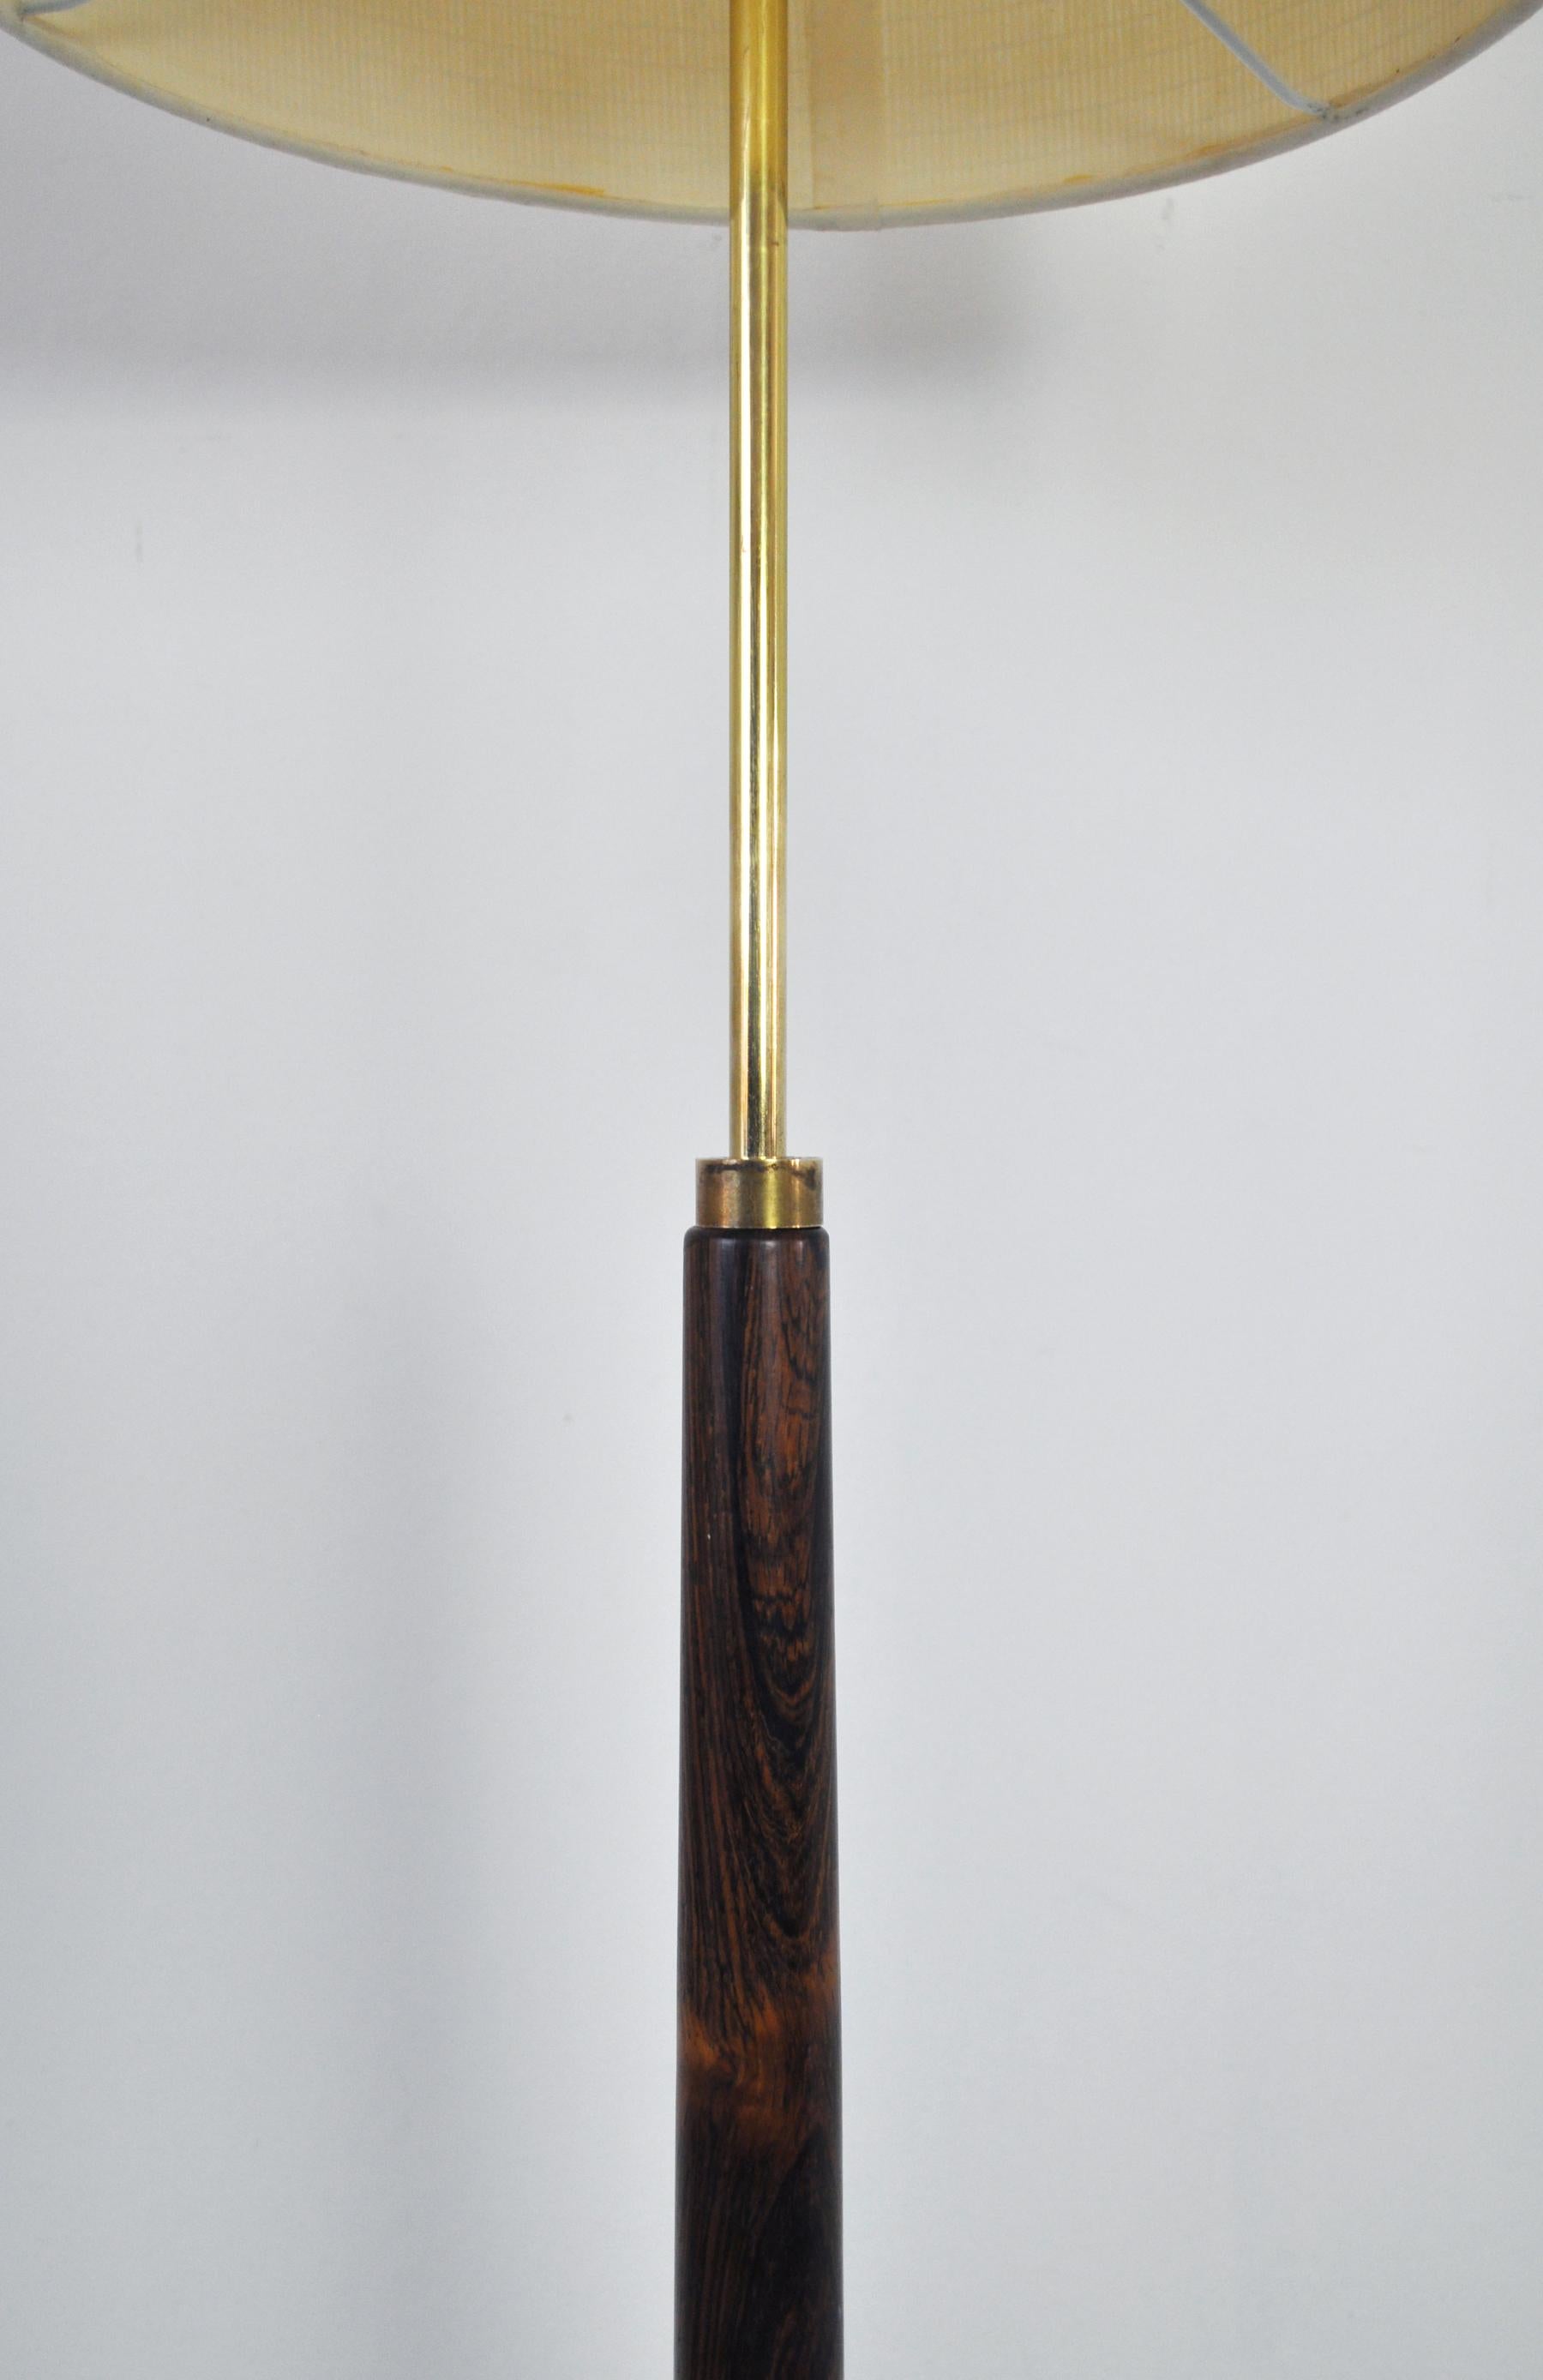 20th Century Mid-Century Modern Danish Rosewood Floor Lamp with Brass Details, 1960s For Sale